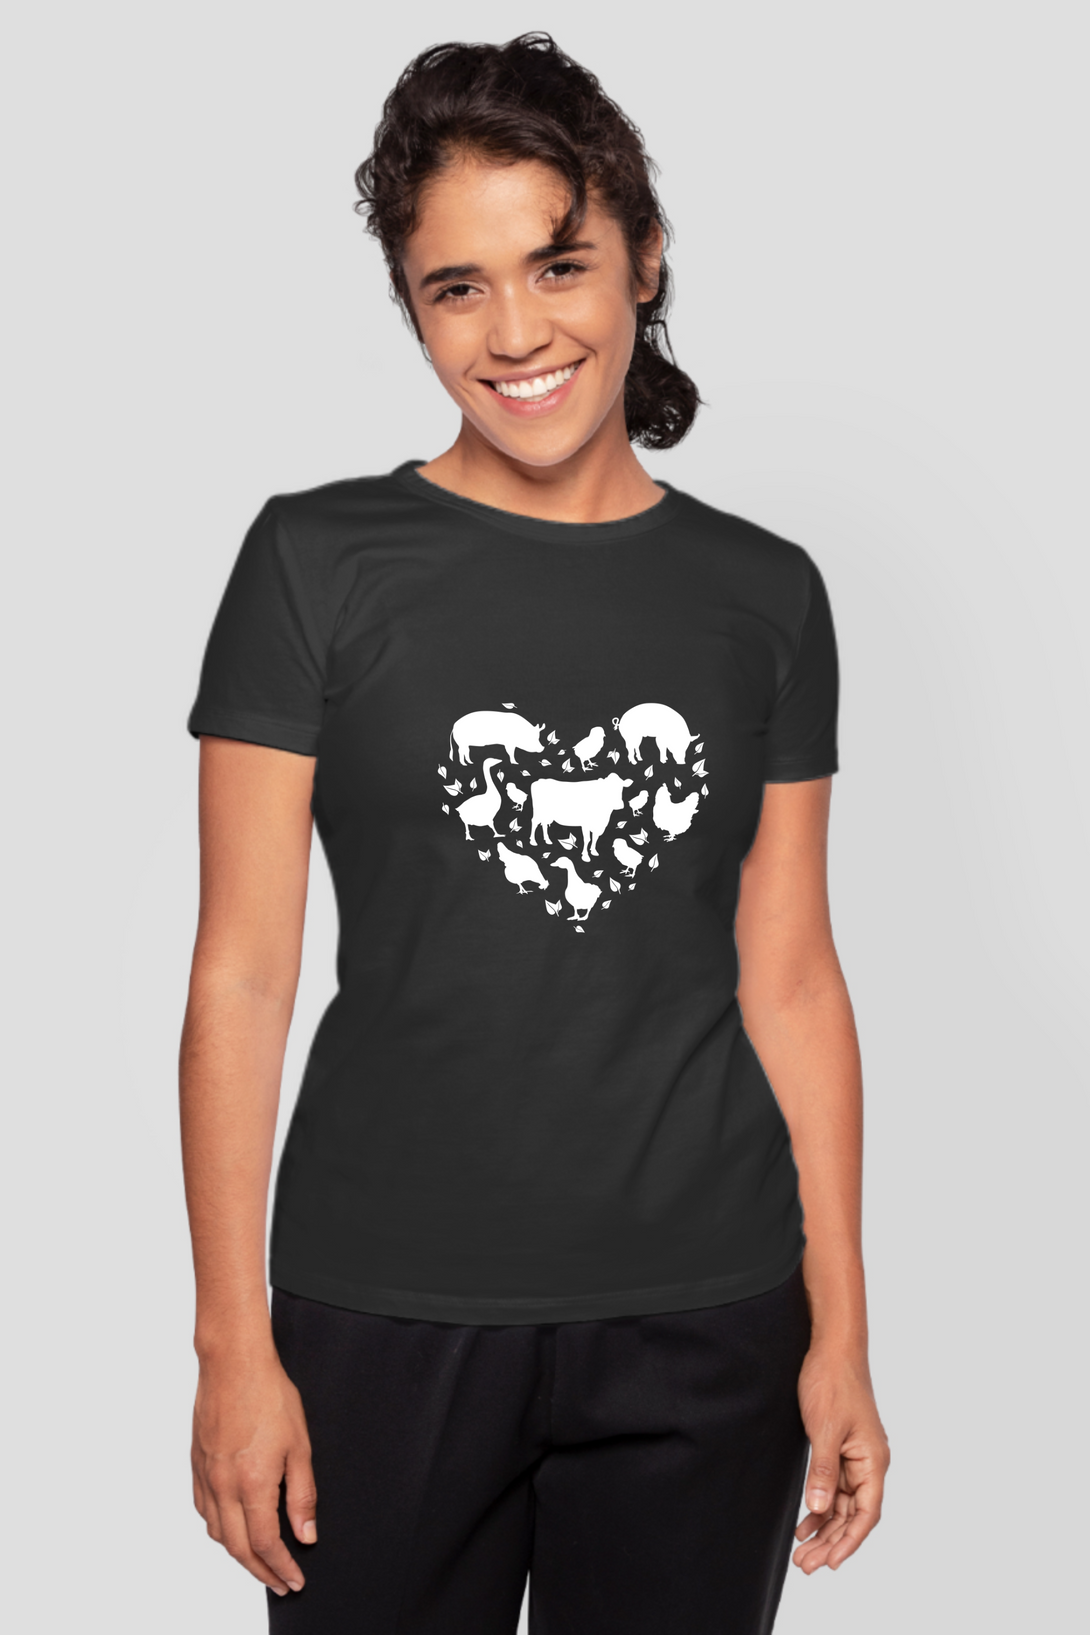 Farm Animals In My Heart Printed T-Shirt For Women - WowWaves - 6